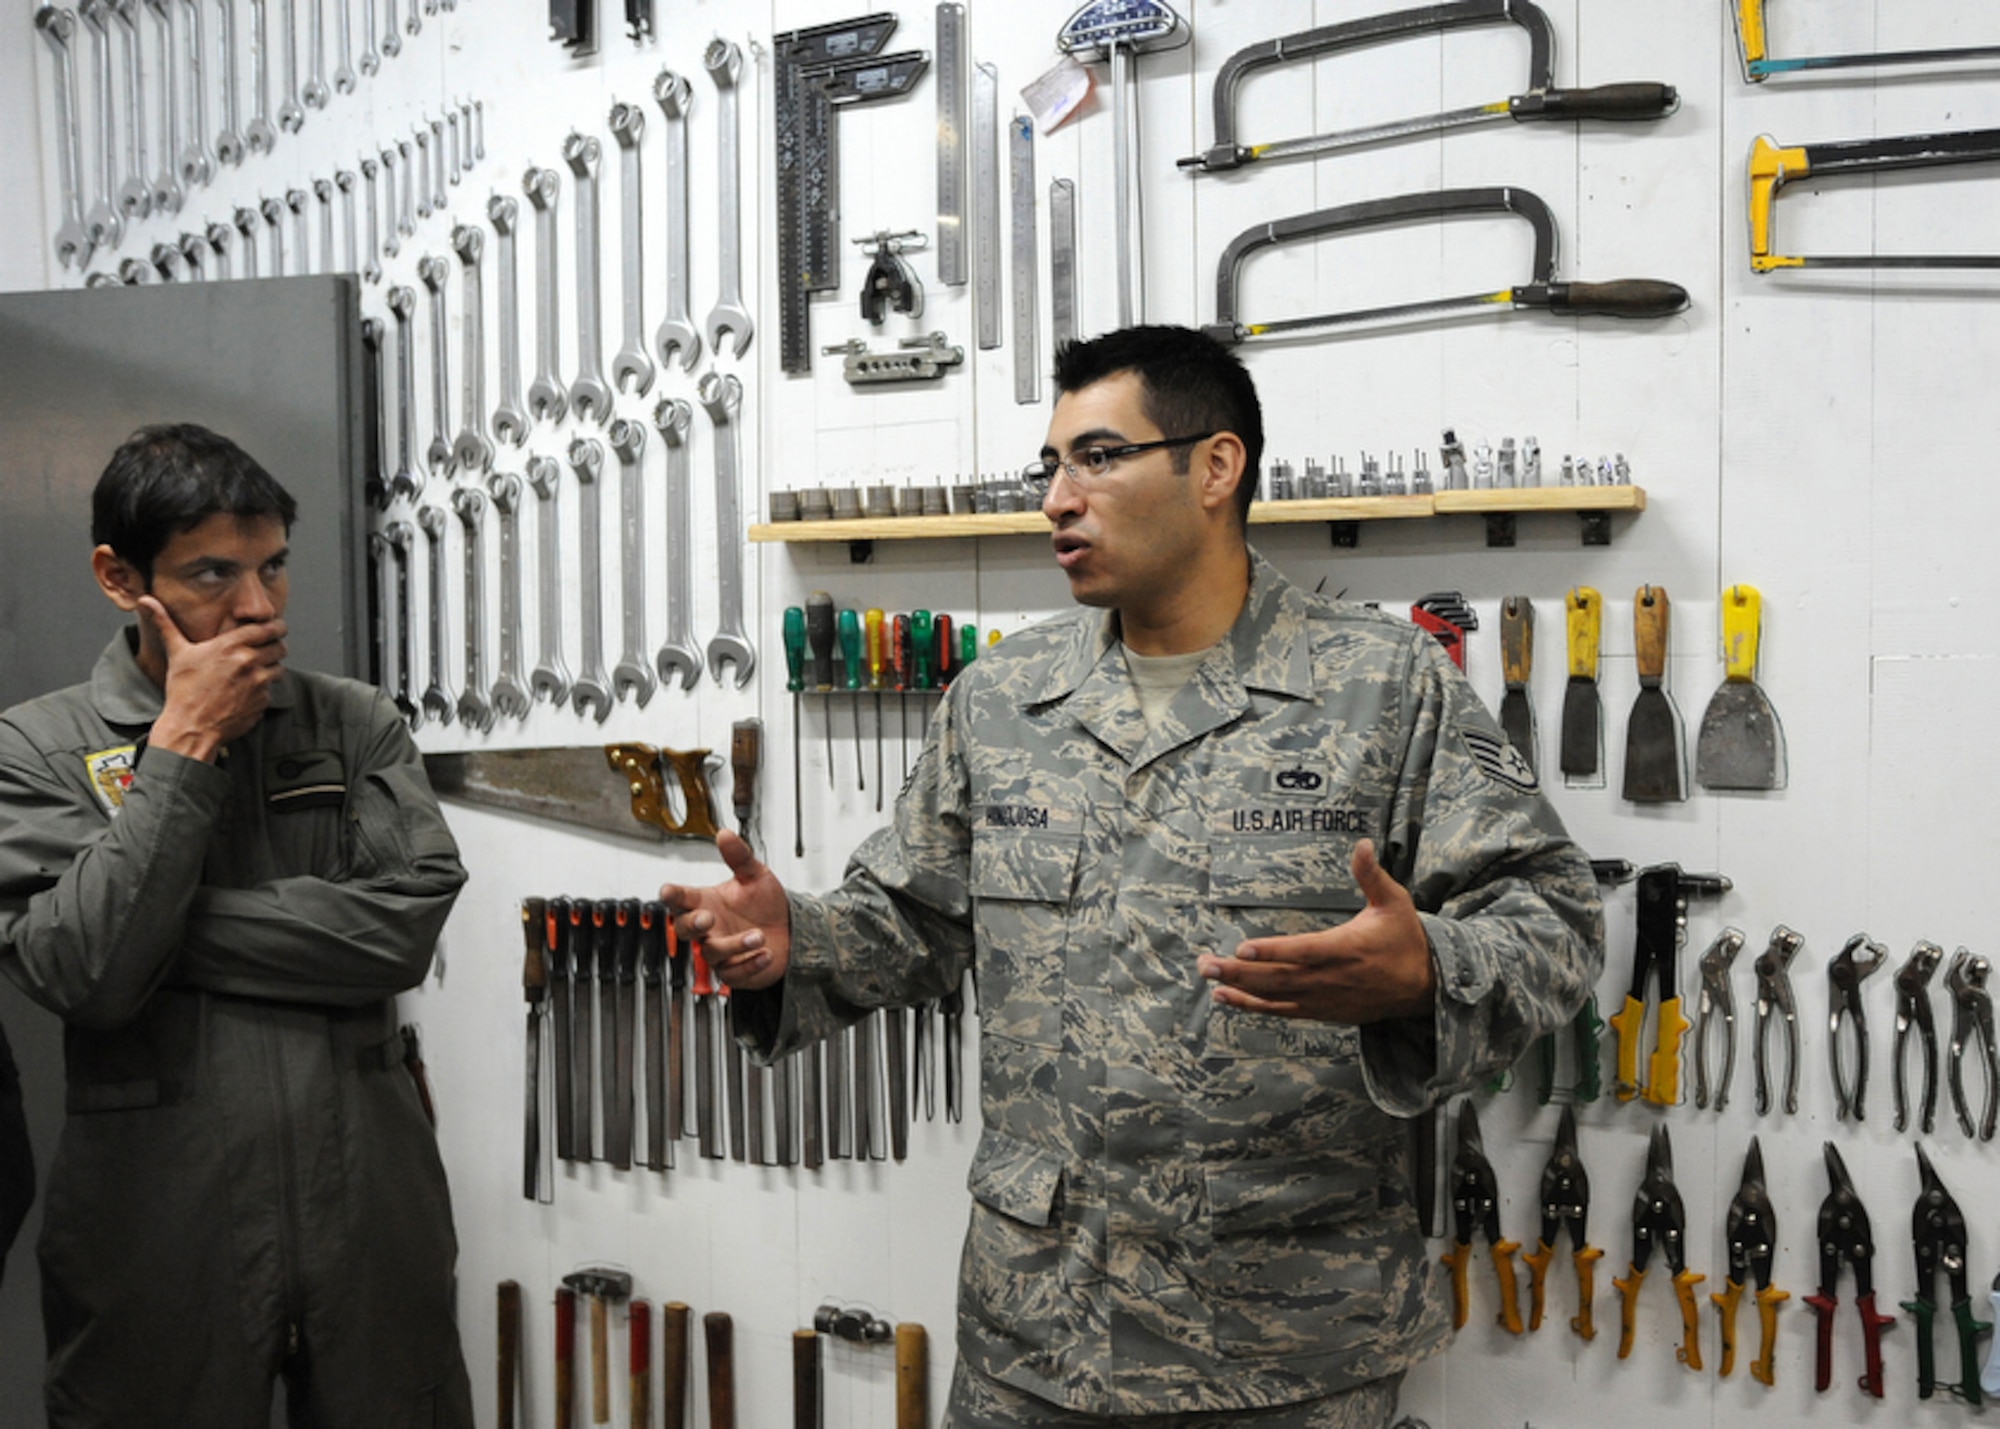 Air Force Staff Sgt. David Hinojosa (right) commends aircraft maintenance mechanics for the proper storage and organization of their units tools during a unit walk-through at Palomar Air Base, Buenos Aires, Argentina on Oct. 30. Sergeant Hinojosa, an aircraft structural maintenance instructor for the Inter-American Air Force Academy at Lackland Air Force Base, Texas. is participating in Operation Southern Partner -- an in-depth, two-week subject matter exchange emphasizing partnership, cooperation and sharing of information with partner nation Air Forces in Latin America. (Air Force photo/Staff Sgt. Bennie J. Davis III) 